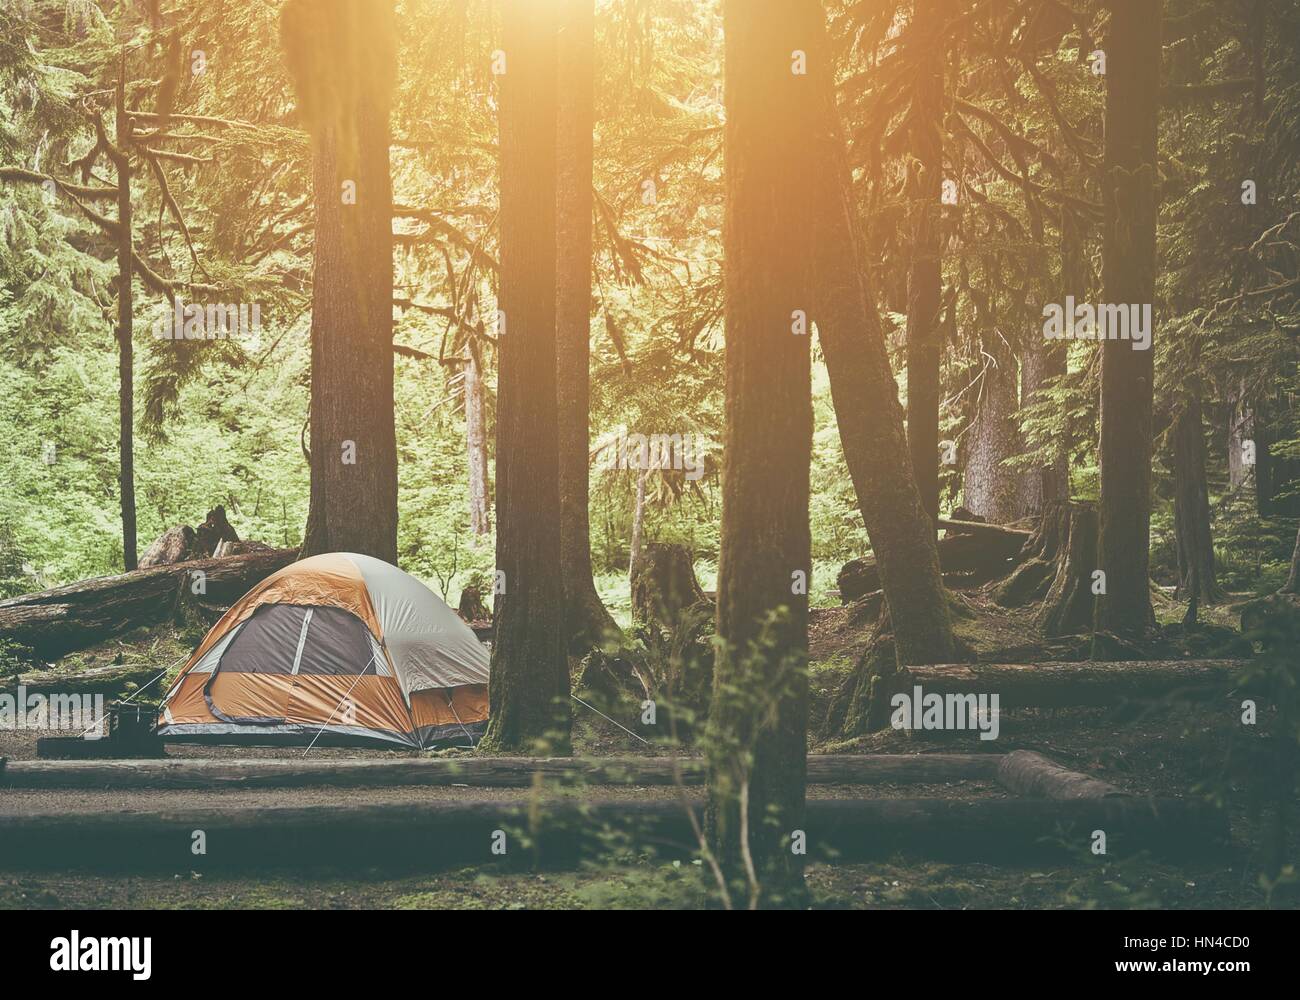 Tent Camping in the Forest Wilderness. Camping Theme. Stock Photo